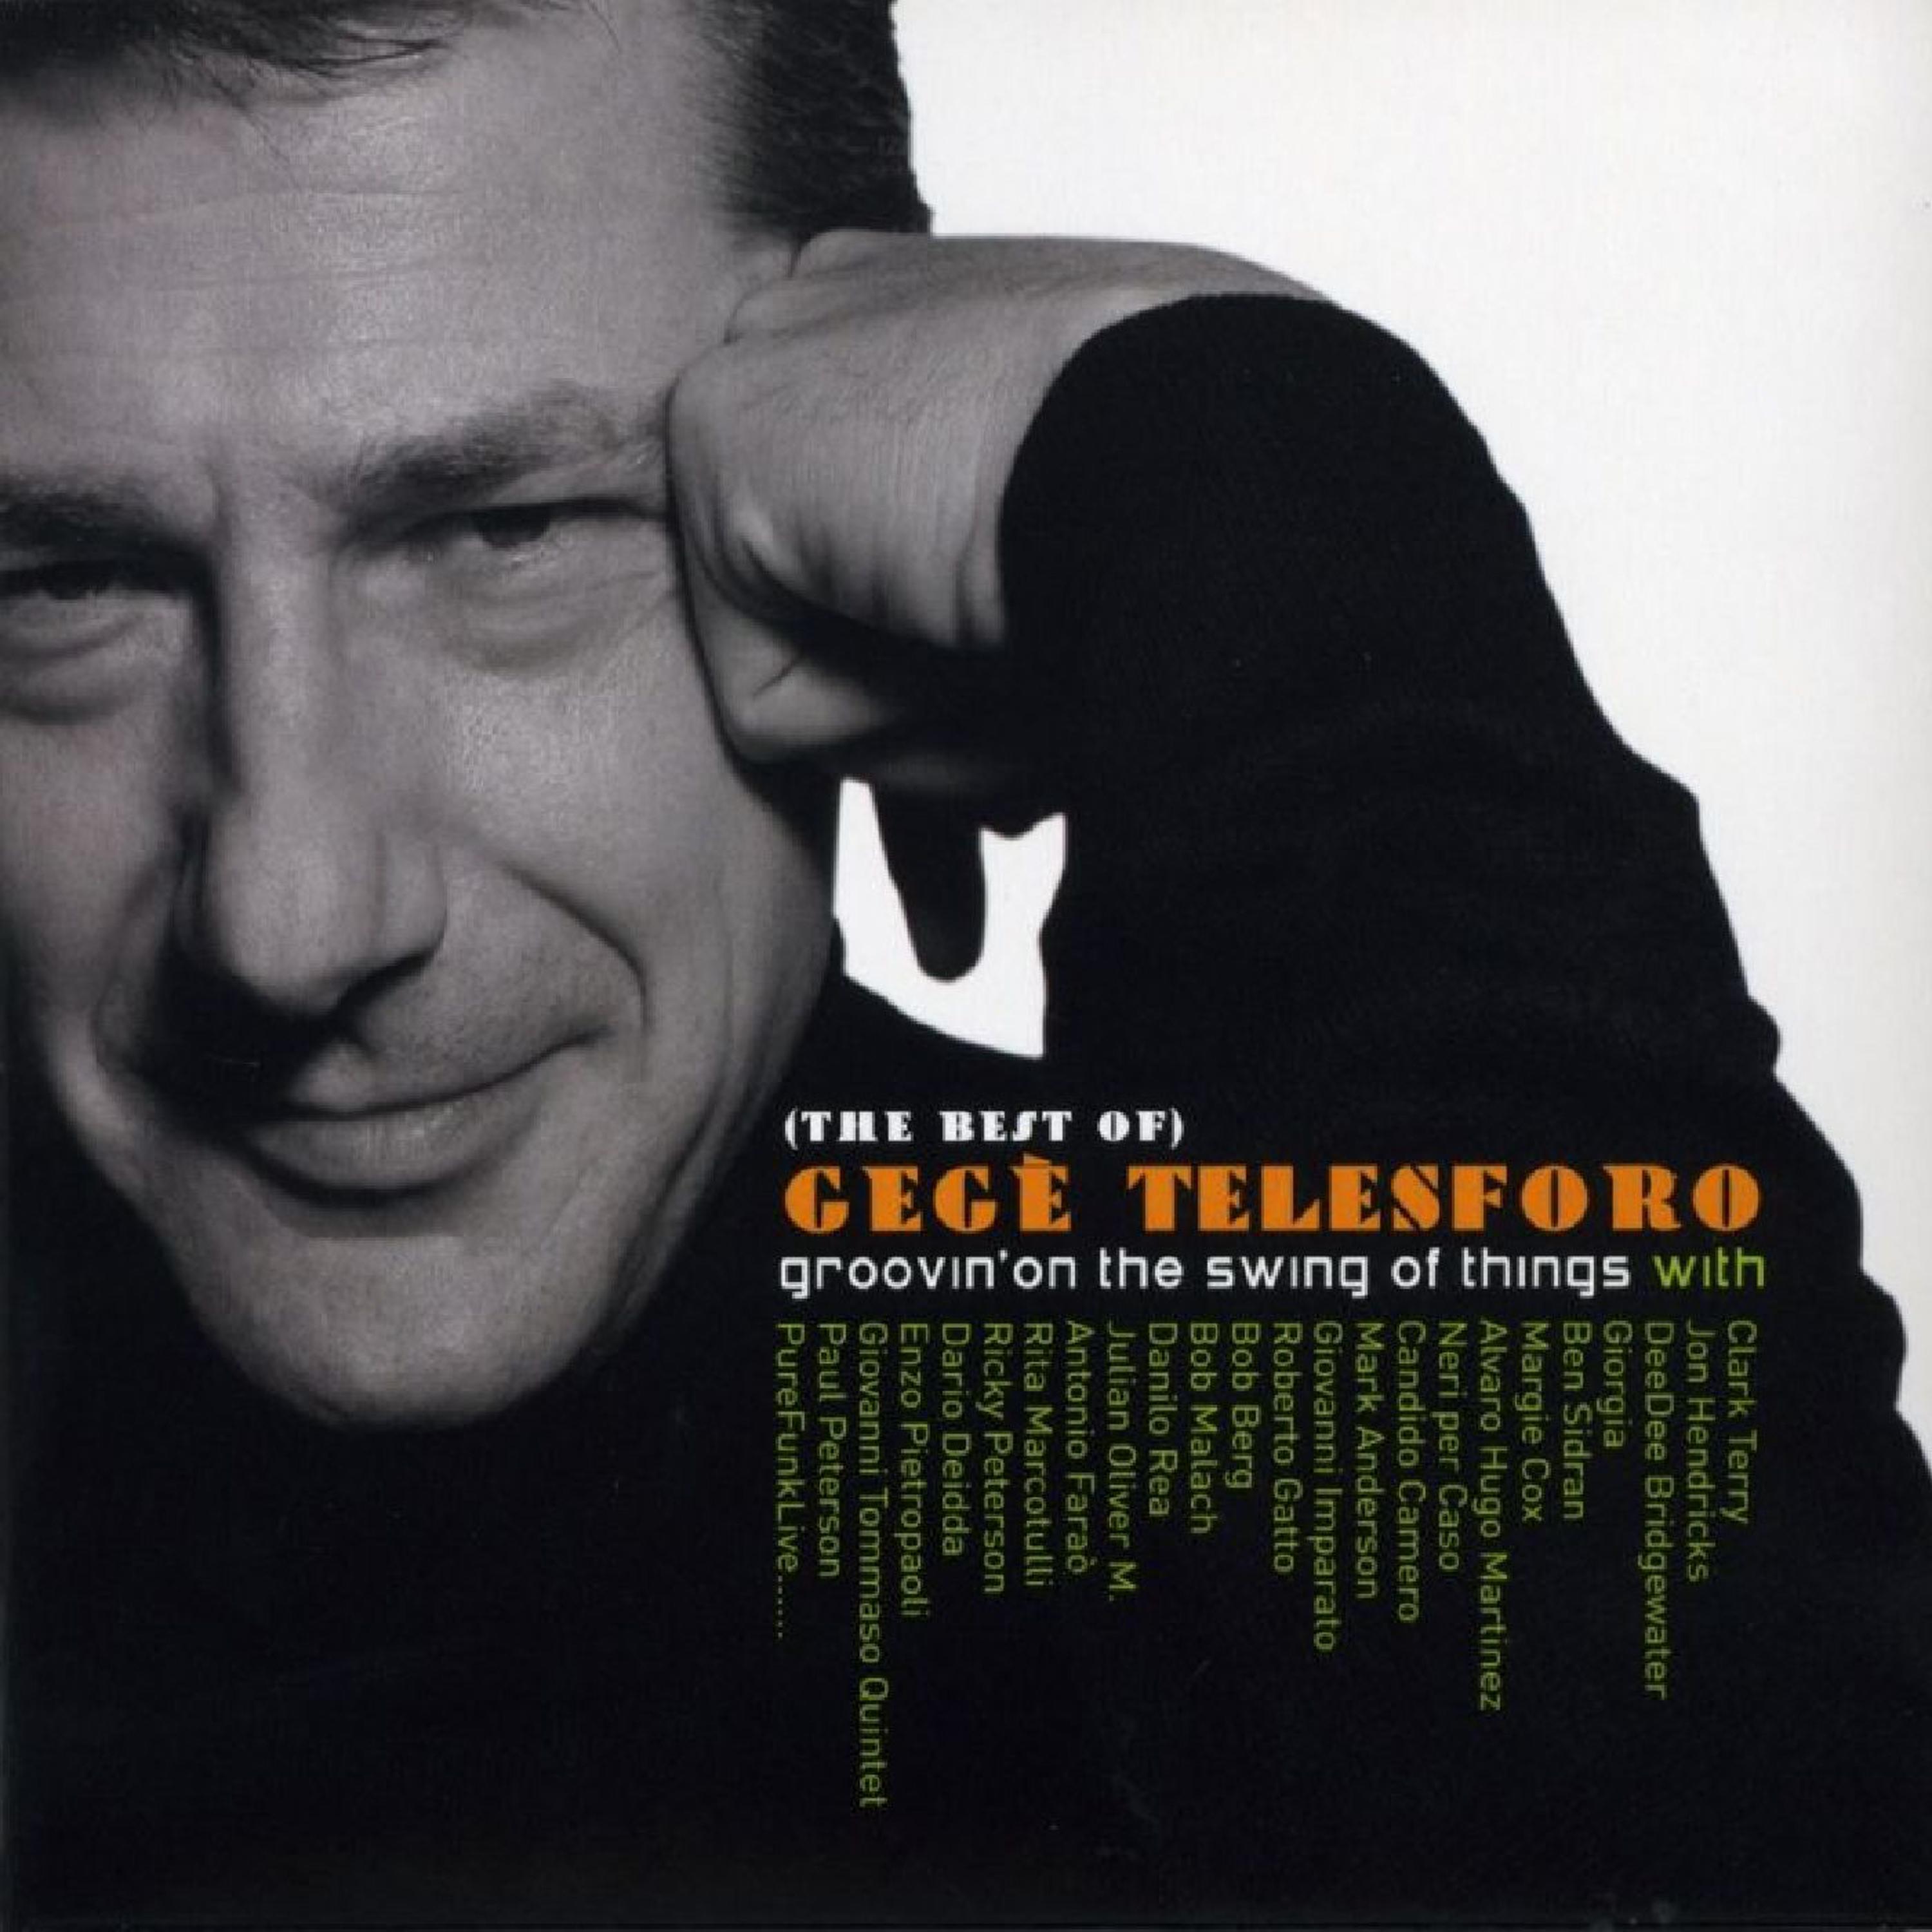 The Best of Gege Telesforo  Groovin' on the Swing of Things